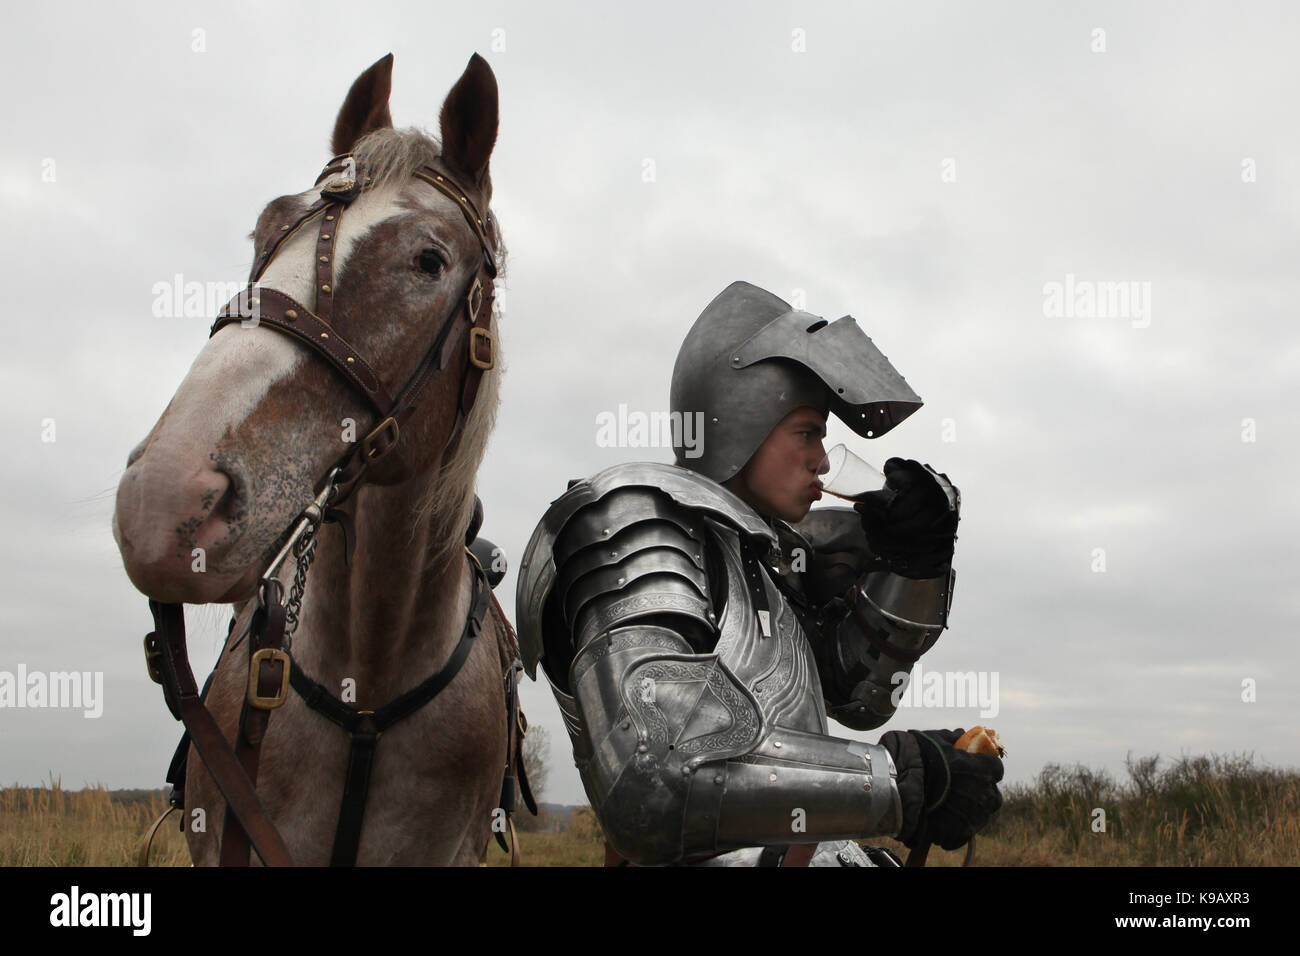 Czech actor Michal Bednář dressed as a medieval knight drinks and eats next to his horse during the filming of the new German film 'Die Ritter' ('The Knights') directed by Carsten Gutschmidt by order of ZDF in Milovice in Central Bohemia, Czech Republic in 23 October 2013. Stock Photo